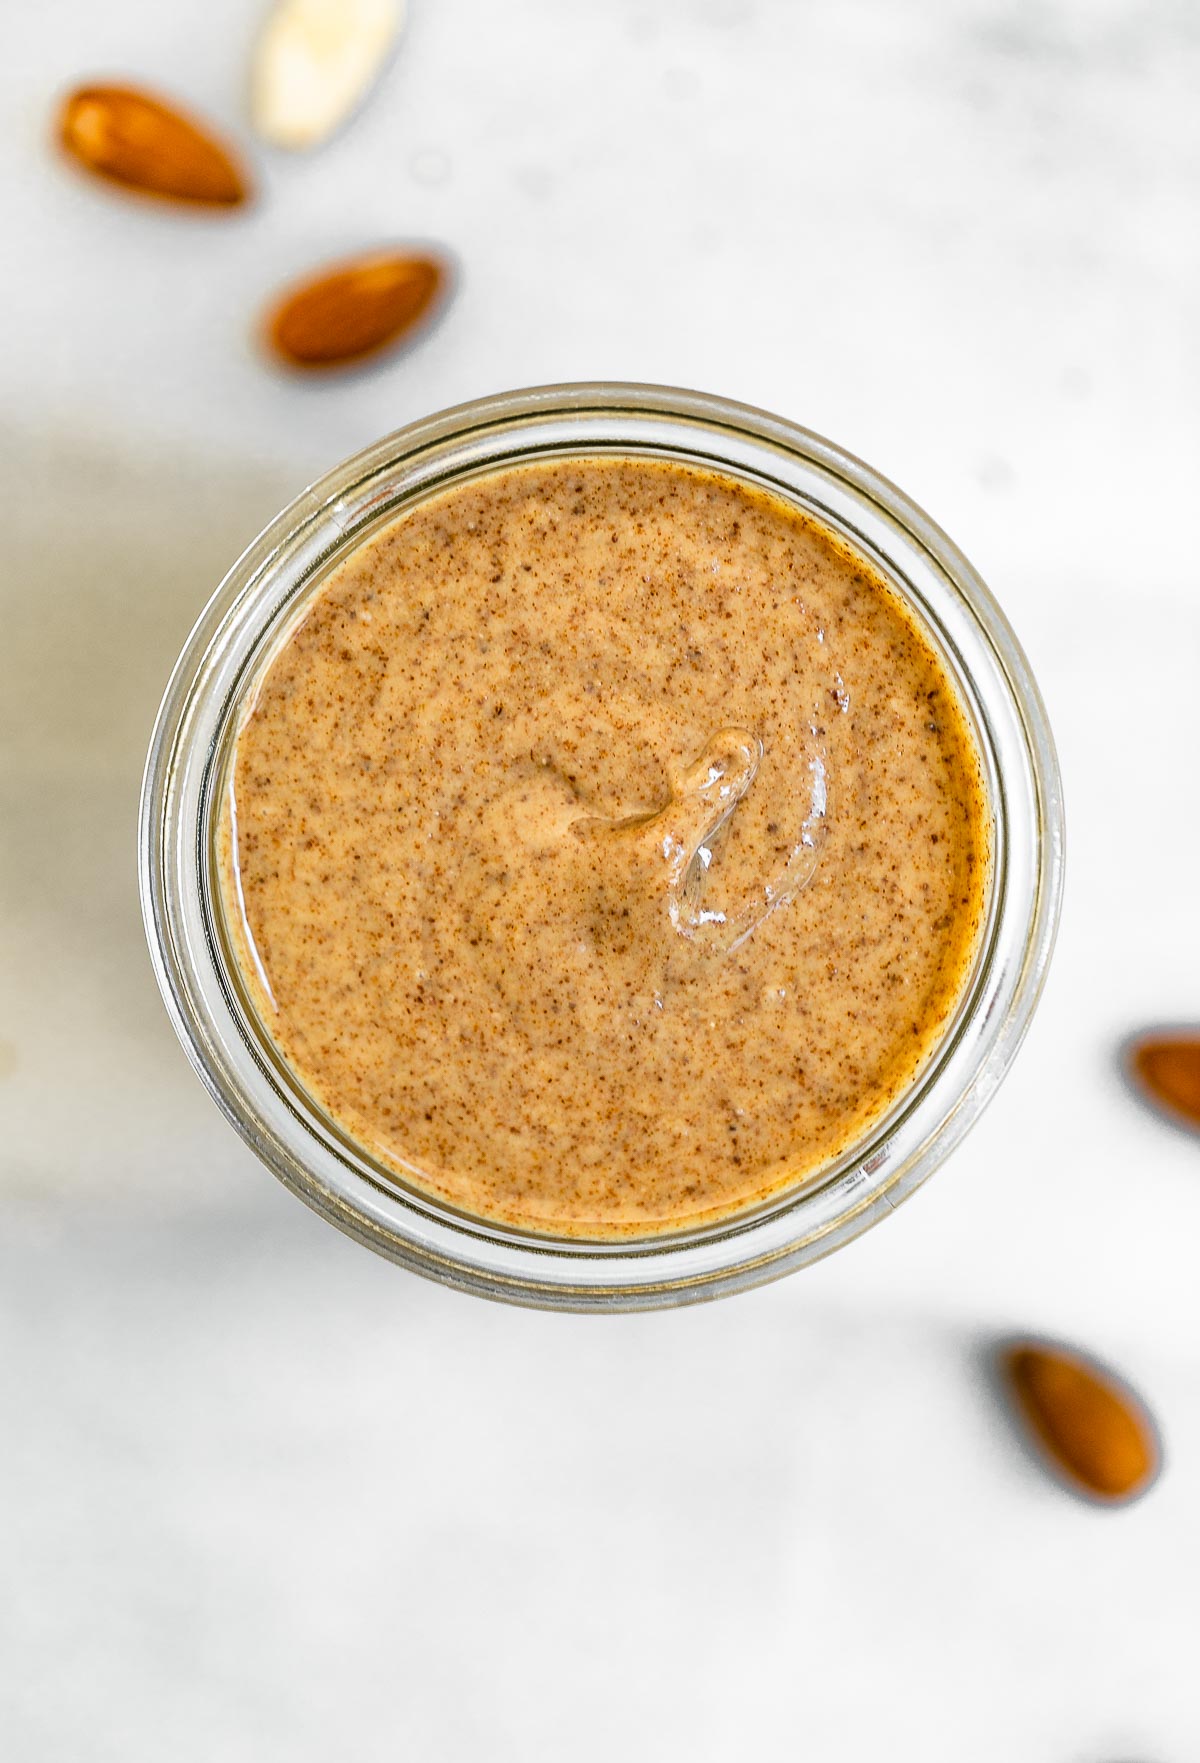 Final almond butter in a jar with almonds on the side.